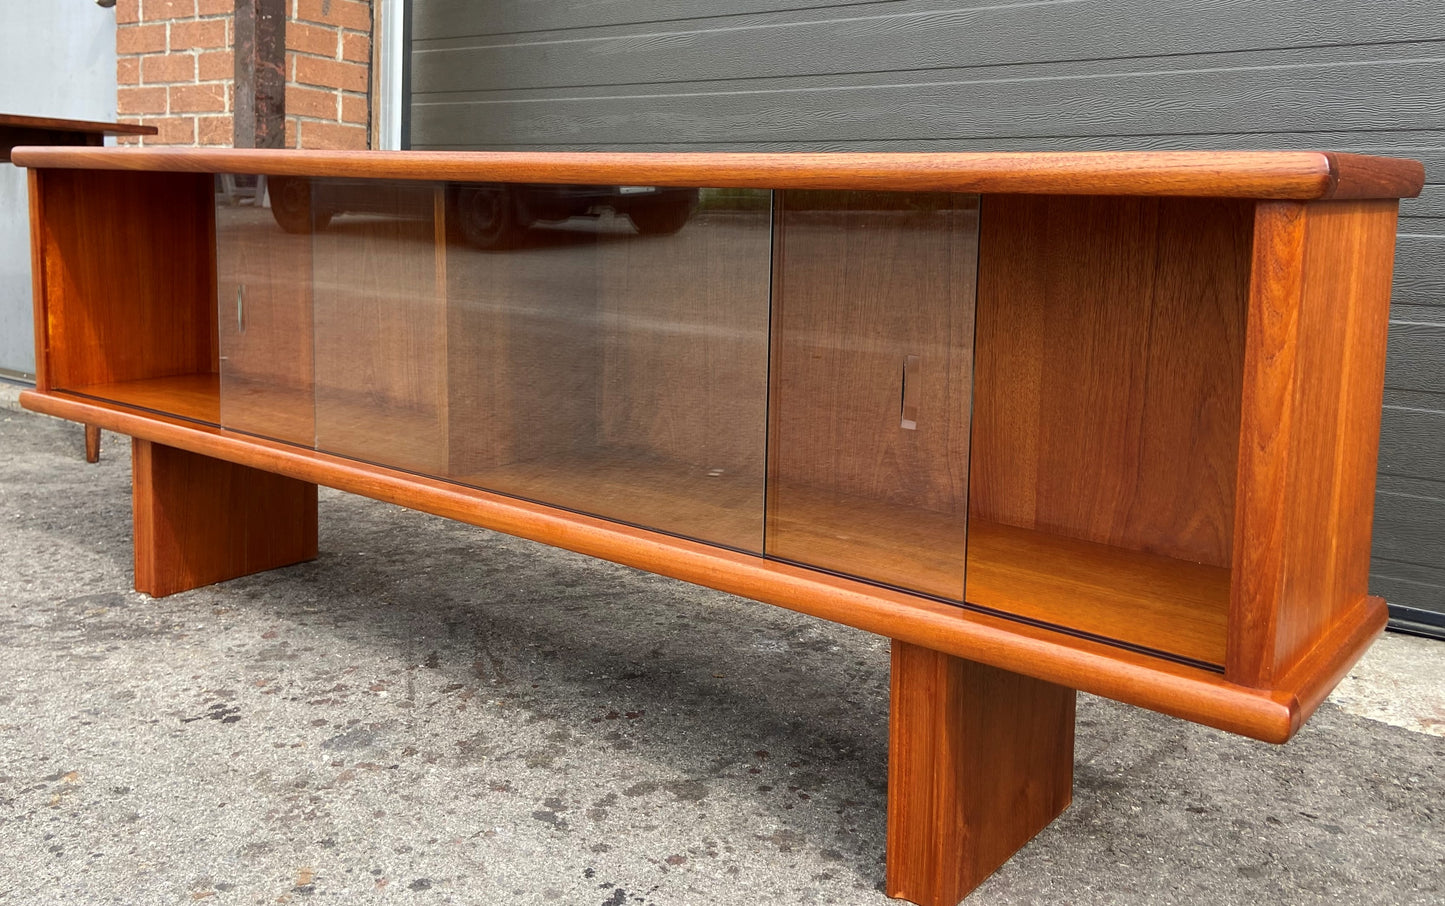 REFINISHED Mid Century Modern Teak Bookcase by Huber, 73.5", Perfect